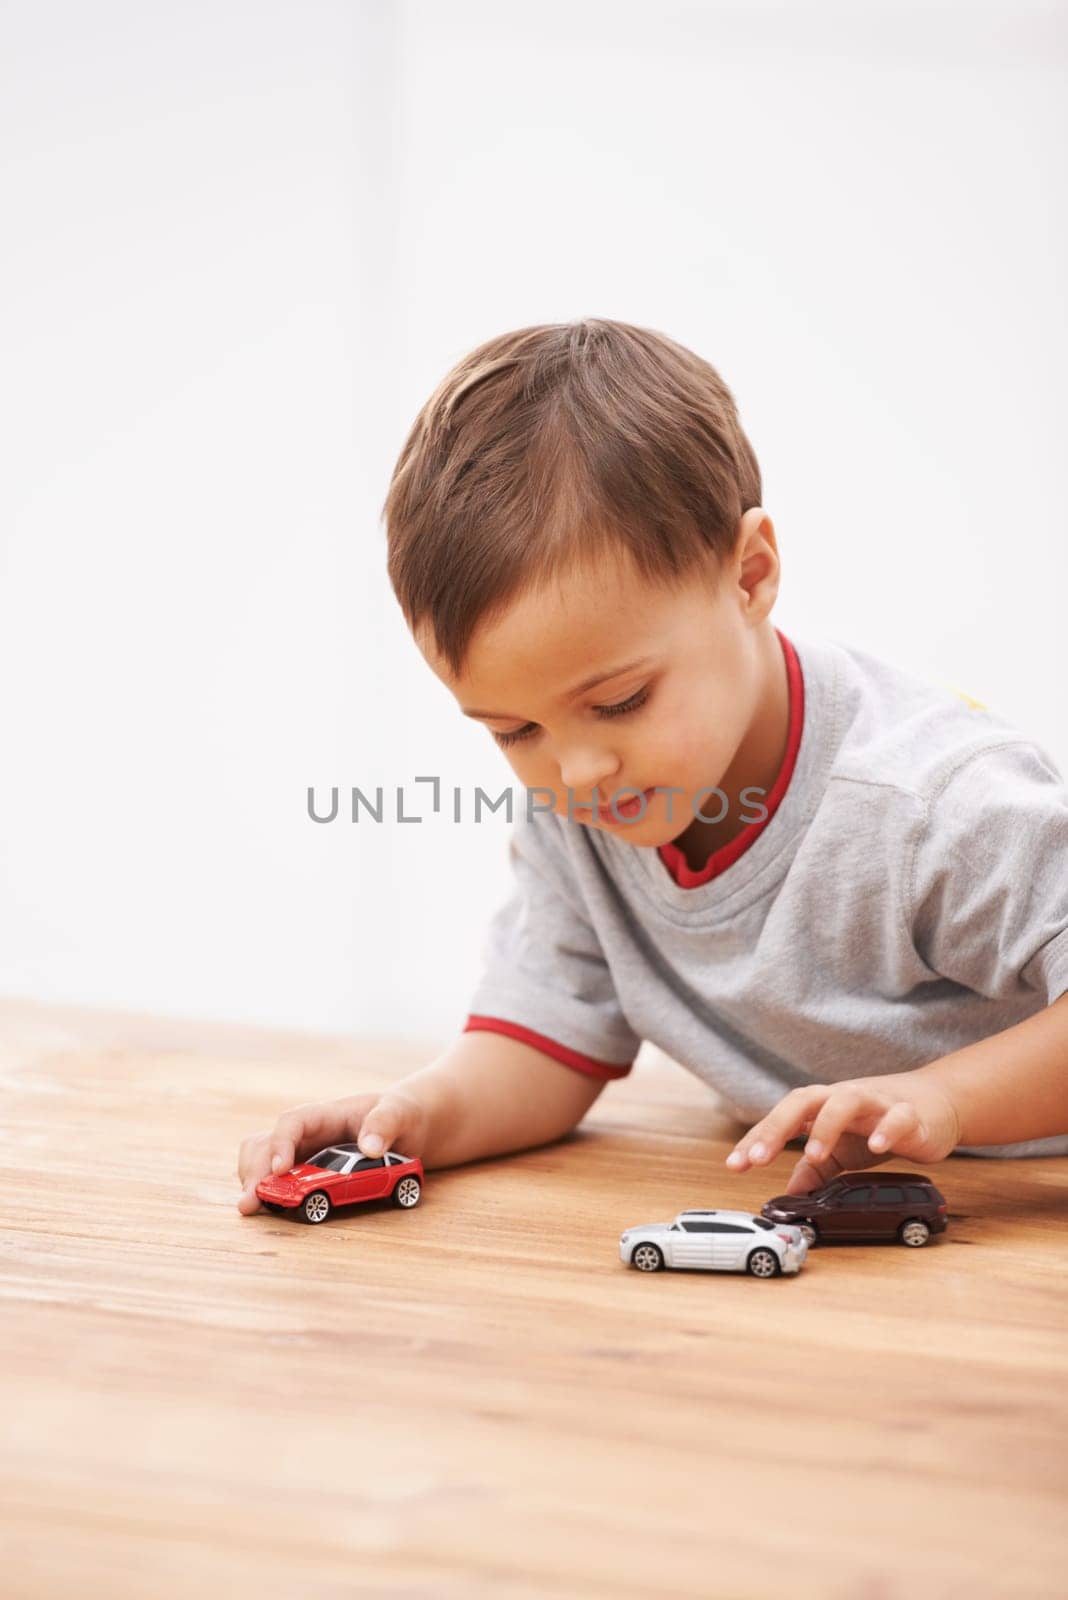 Cars, toys and boy child by table playing for learning, development and fun at modern home. Cute, sweet and young kid enjoying a game with plastic vehicles by wood for childhood hobby at house